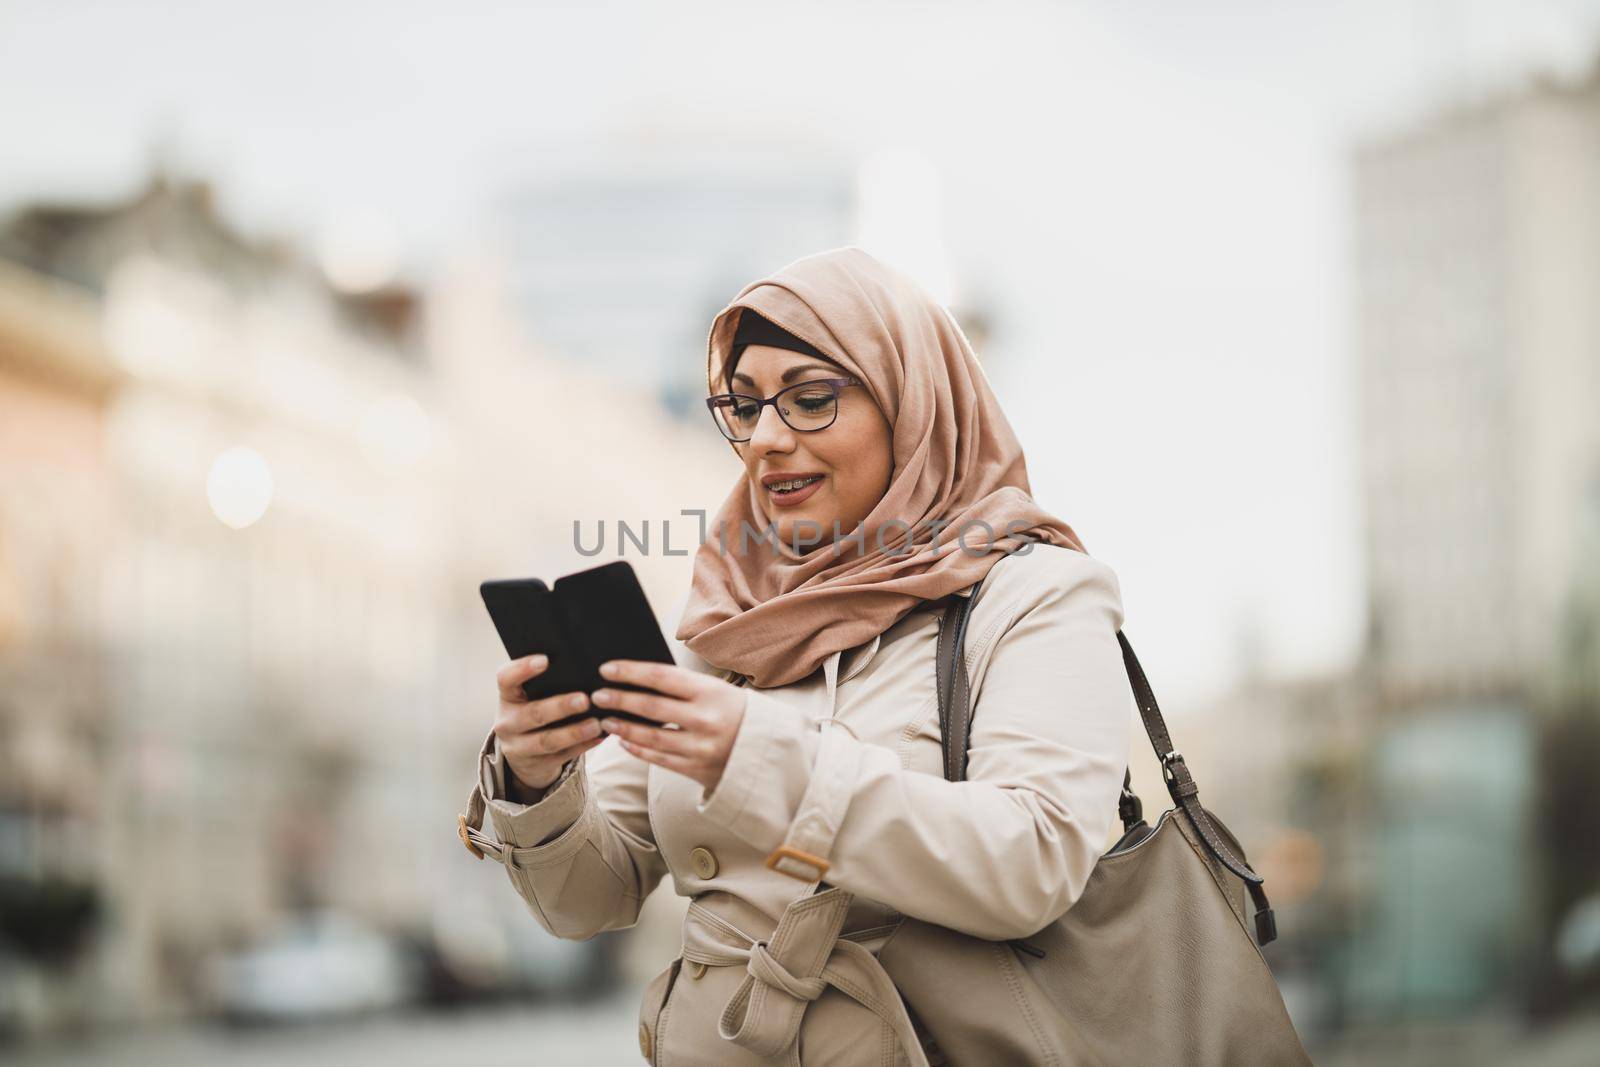 Smiling Muslim woman wearing a hijab and tipping messages on her smartphone while standing in urban environment.